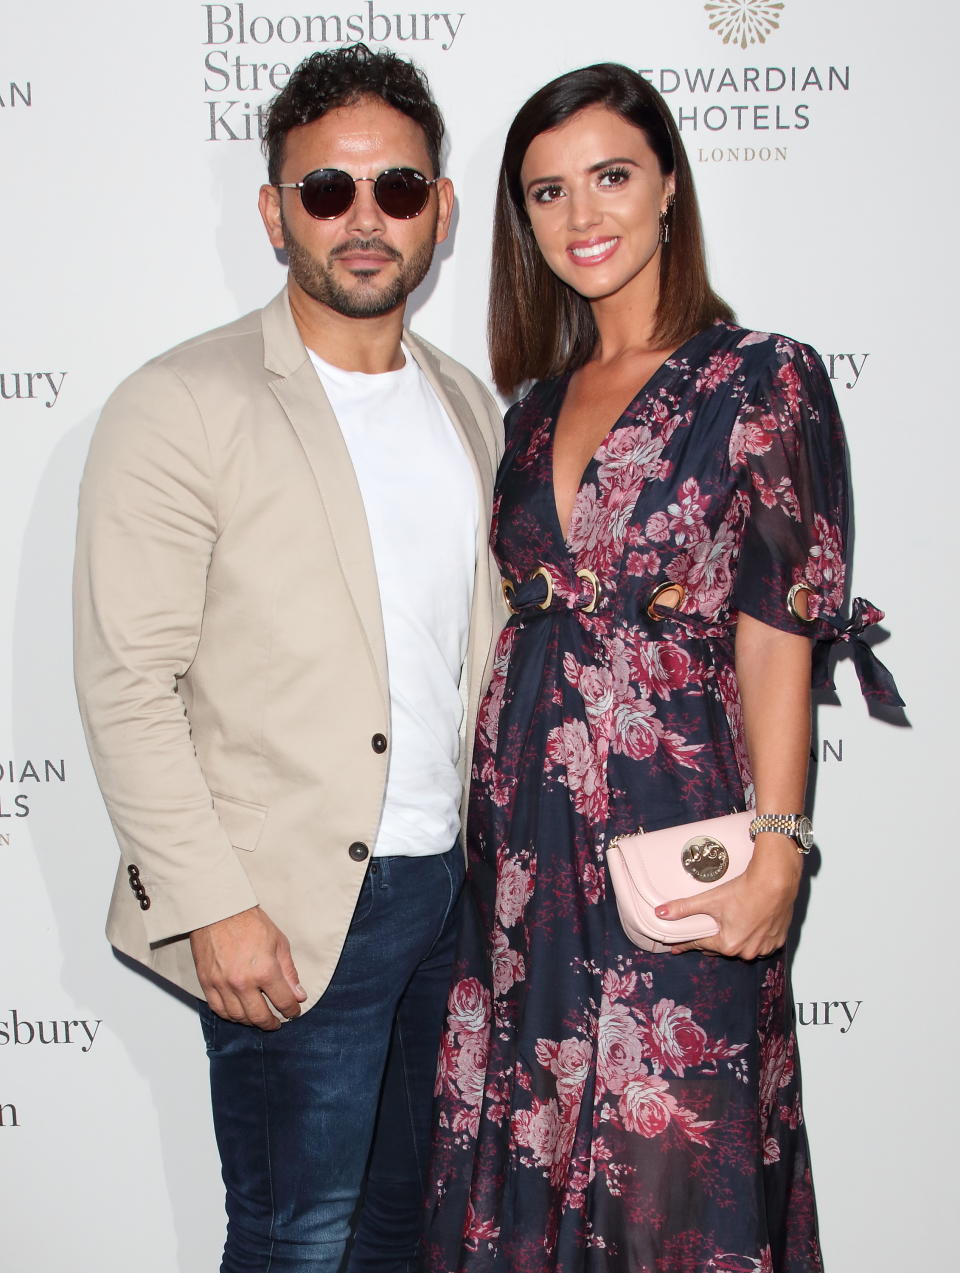 LONDON, UNITED KINGDOM - 2019/08/08: Ryan Thomas and Lucy Mecklenburgh arrive at the Bloomsbury Street Kitchen Restaurant Launch Party in London. (Photo by Keith Mayhew/SOPA Images/LightRocket via Getty Images)